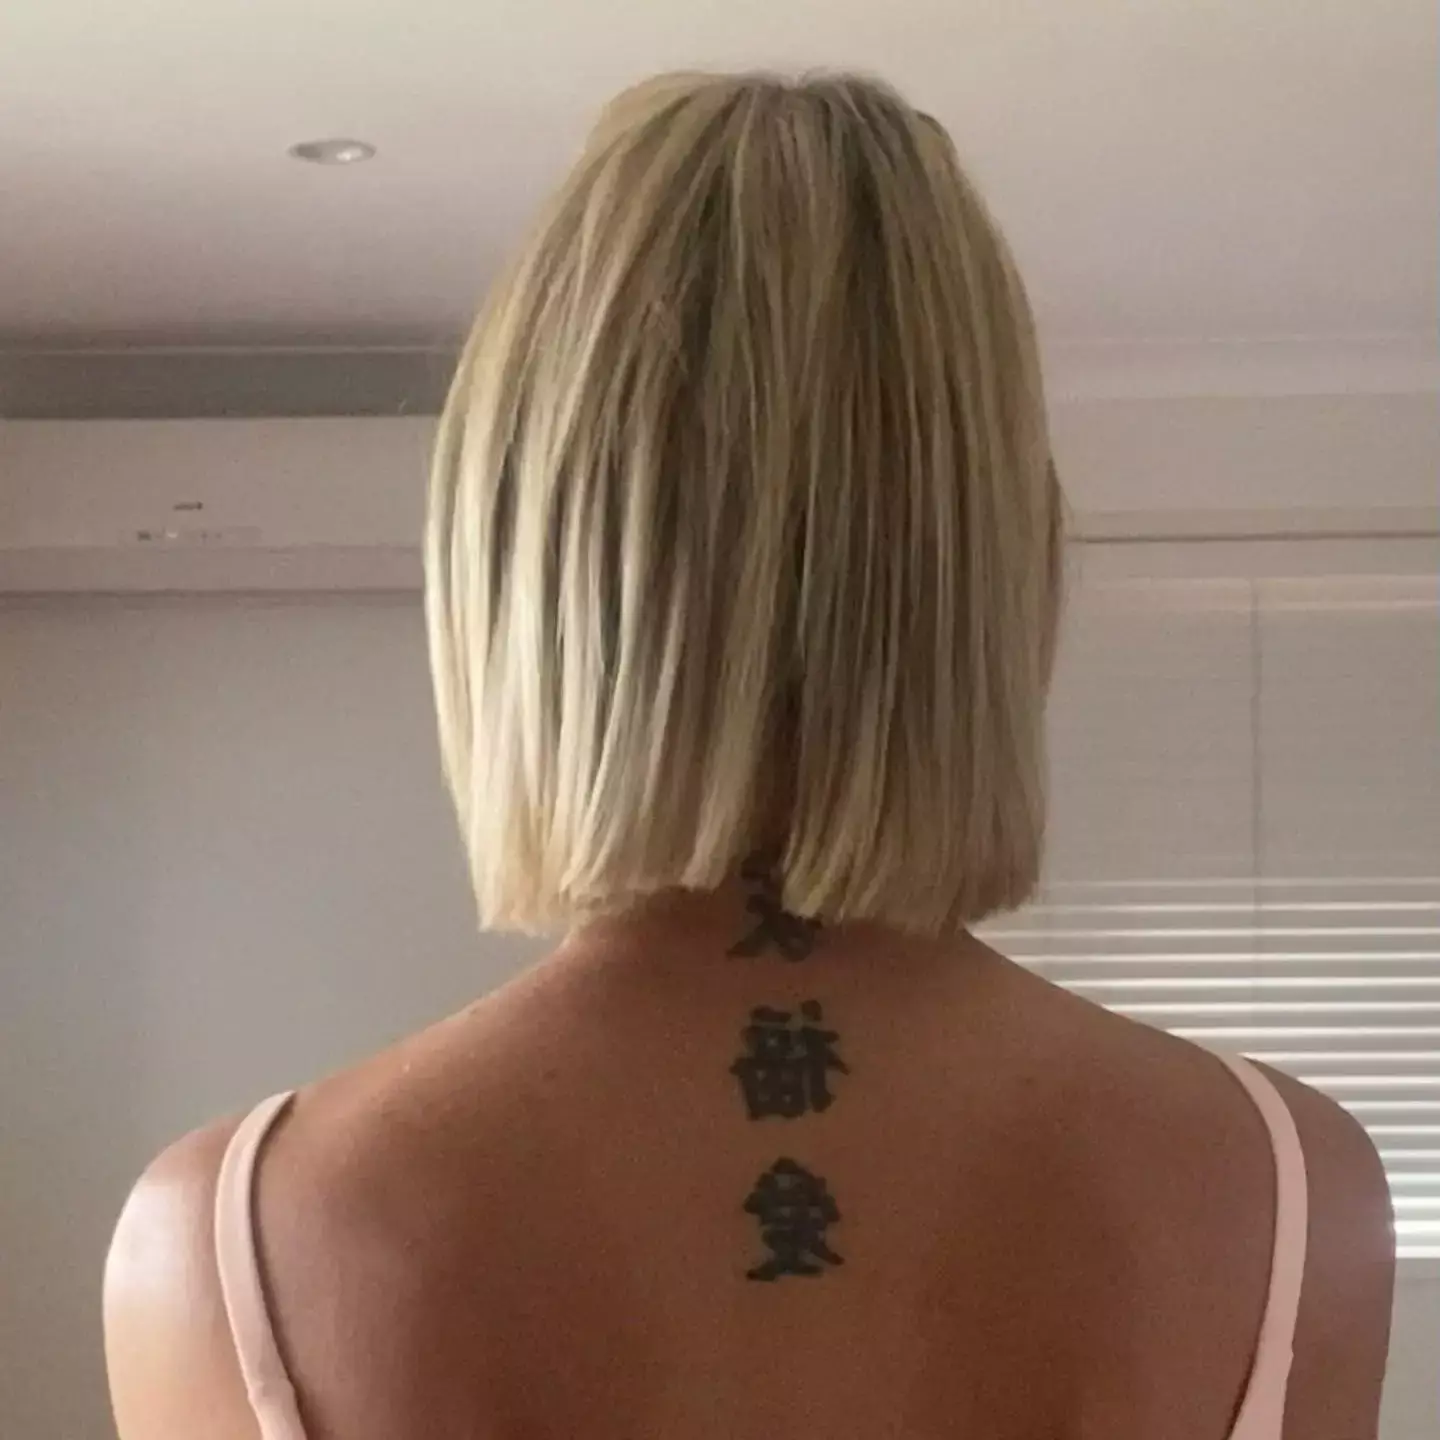 Katie Hally says she was turned away from the venue due to her tattoos.